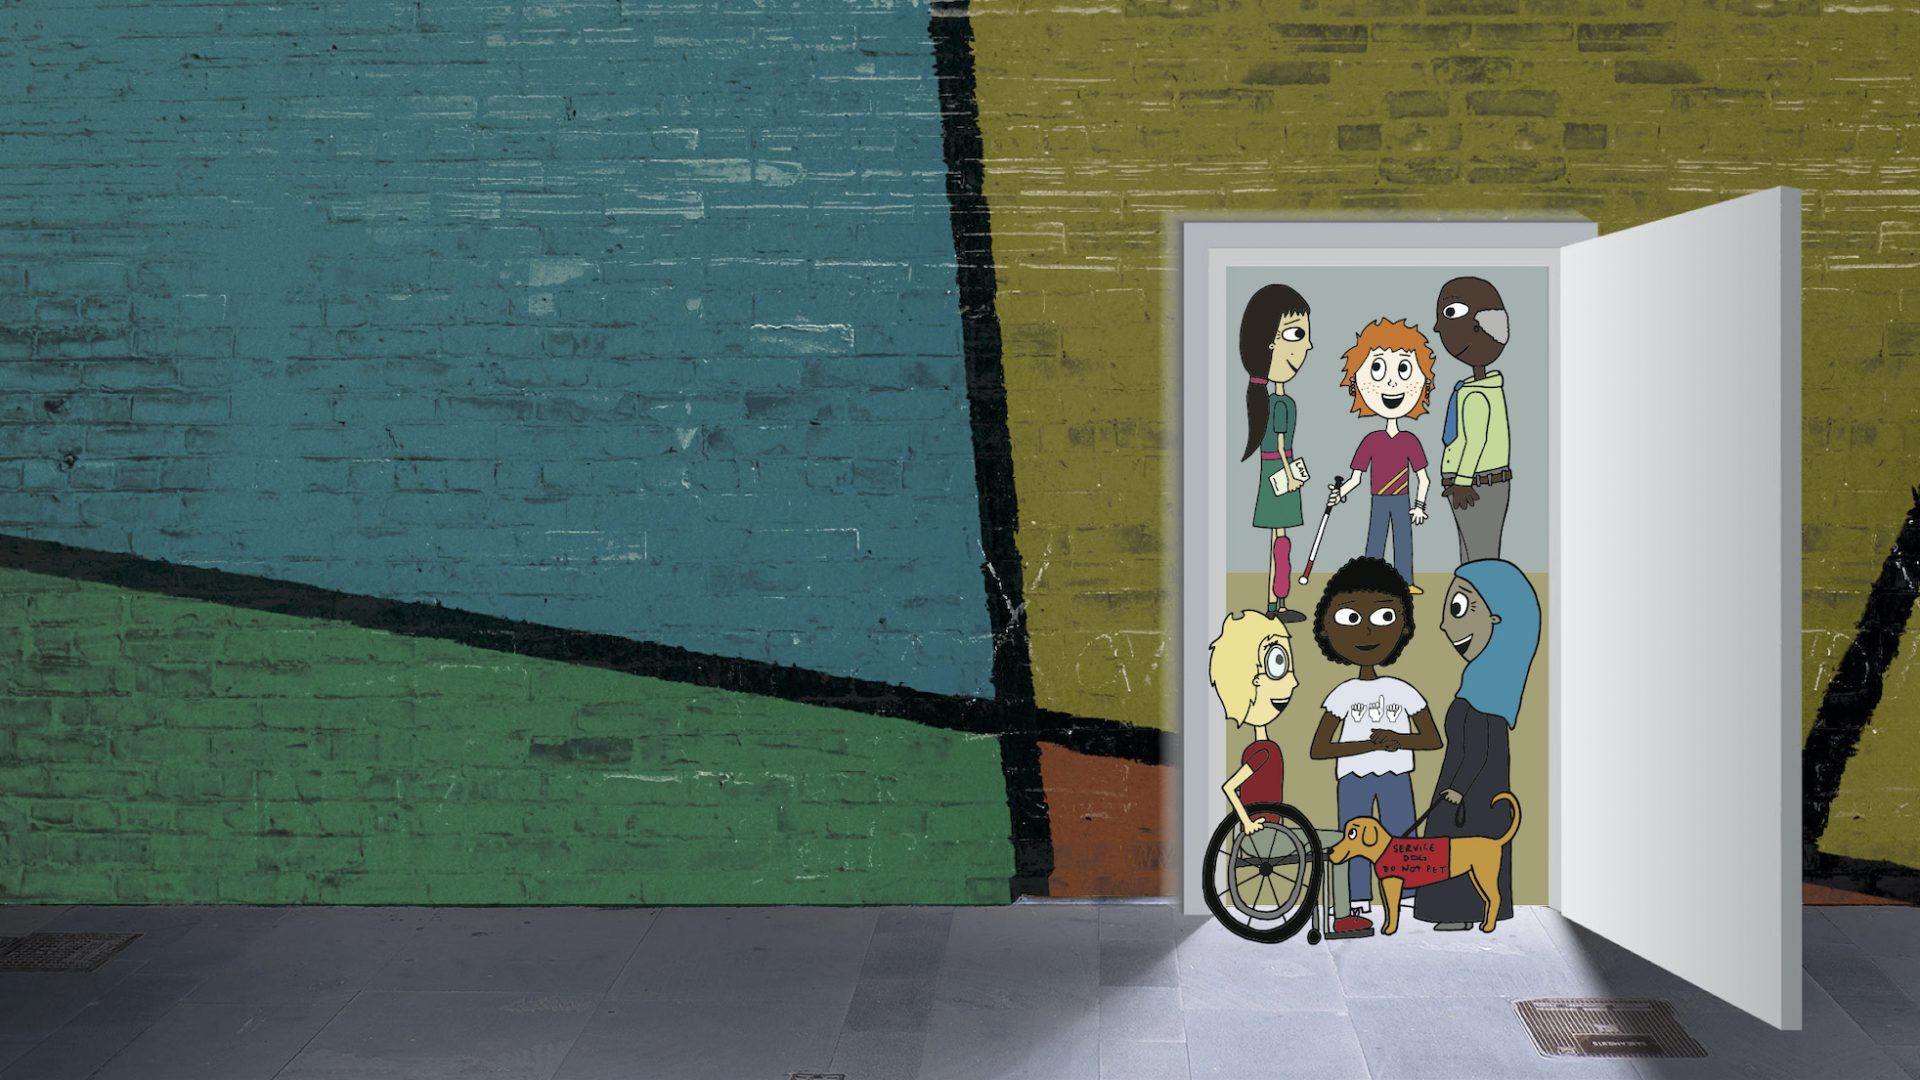 Cover image for the Accessibility Project. A multicolored wall has a door on the right which is open. Through the door you can see a collection of people of different races, ages, and abilities.